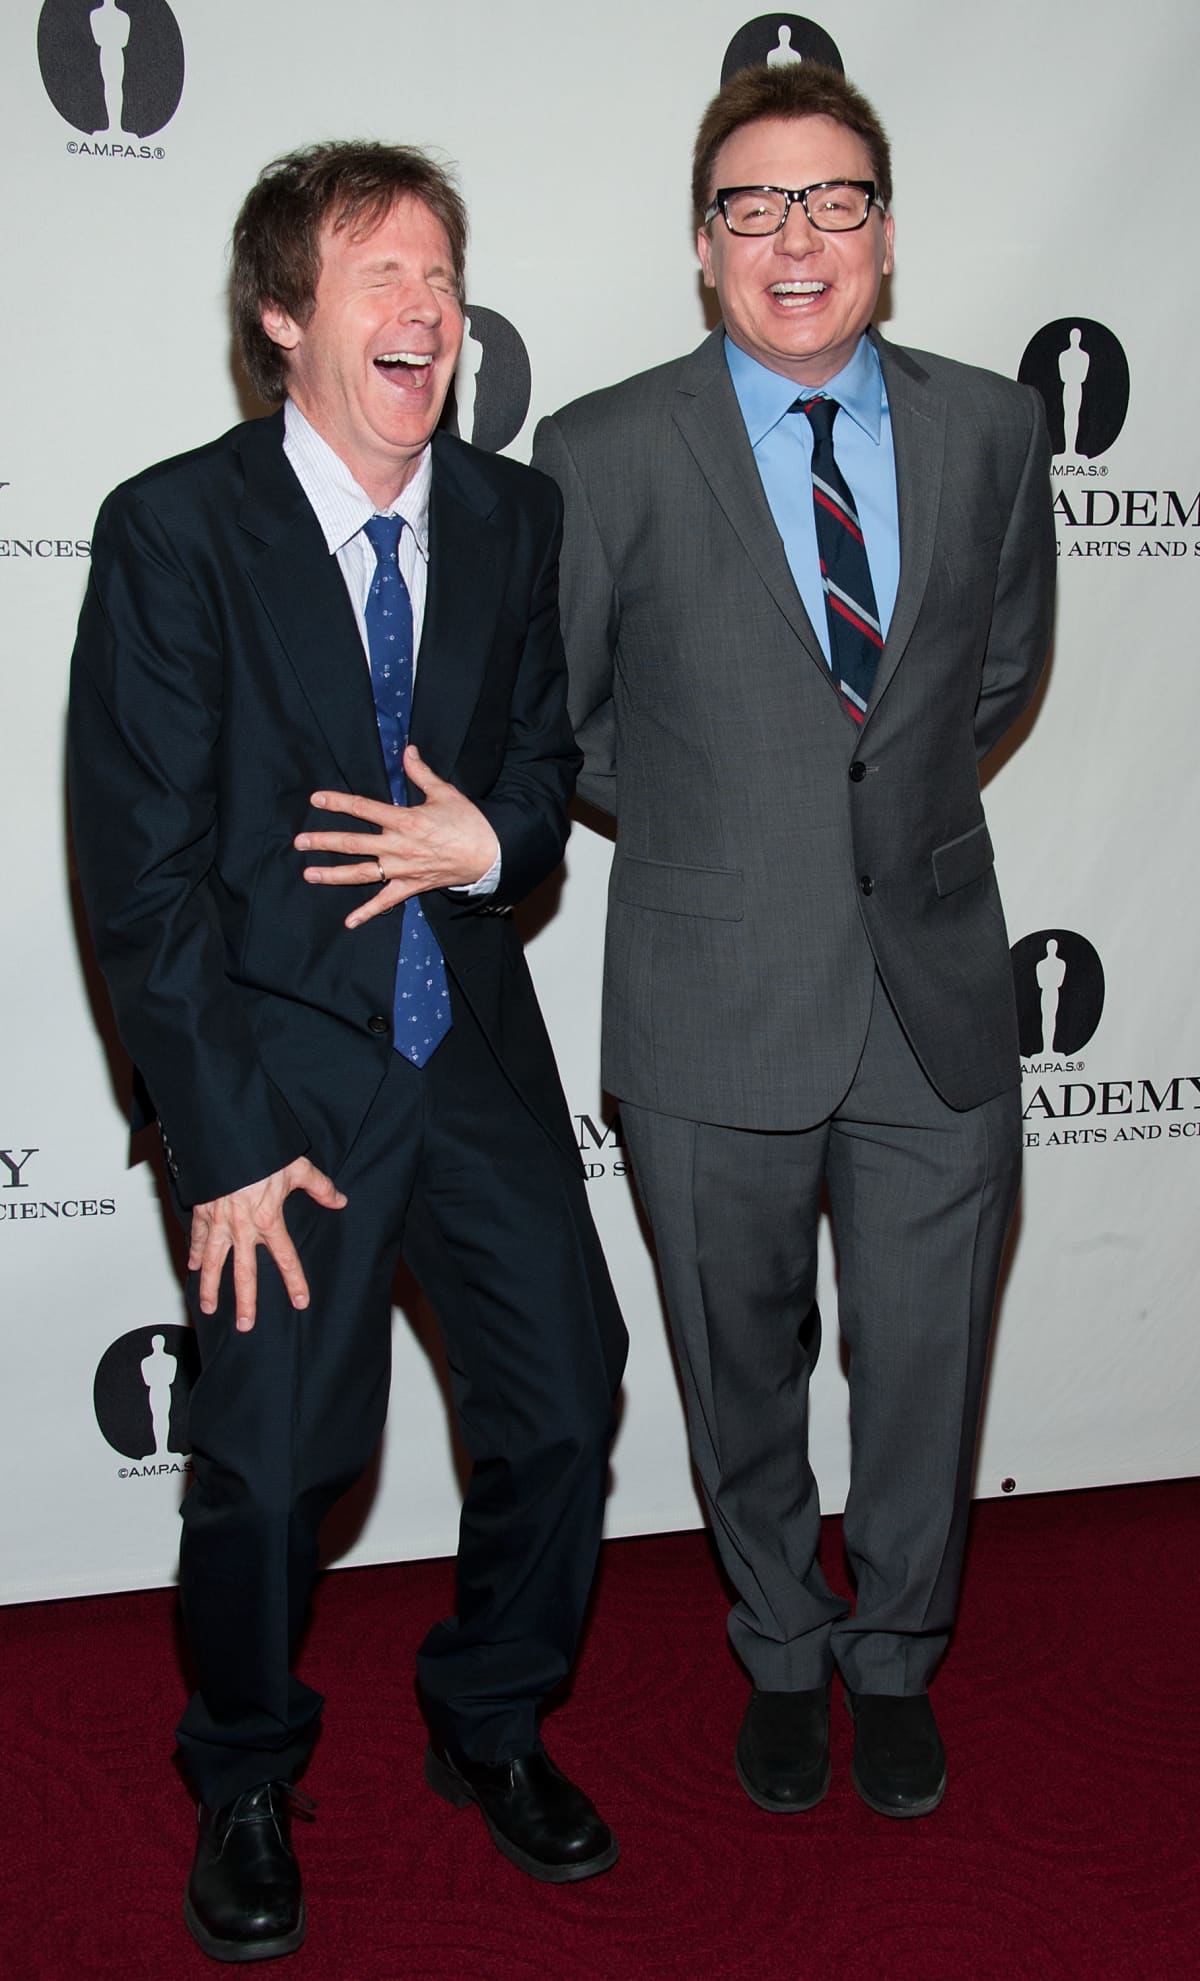 BEVERLY HILLS, CA - APRIL 23: Dana Carvey and Mike Myers attends Academy Of Motion Picture Arts And Sciences Hosts A "Wayne's World" Reunion at AMPAS Samuel Goldwyn Theater on April 23, 2013 in Beverly Hills, California. (Photo by Valerie Macon/Getty Images)